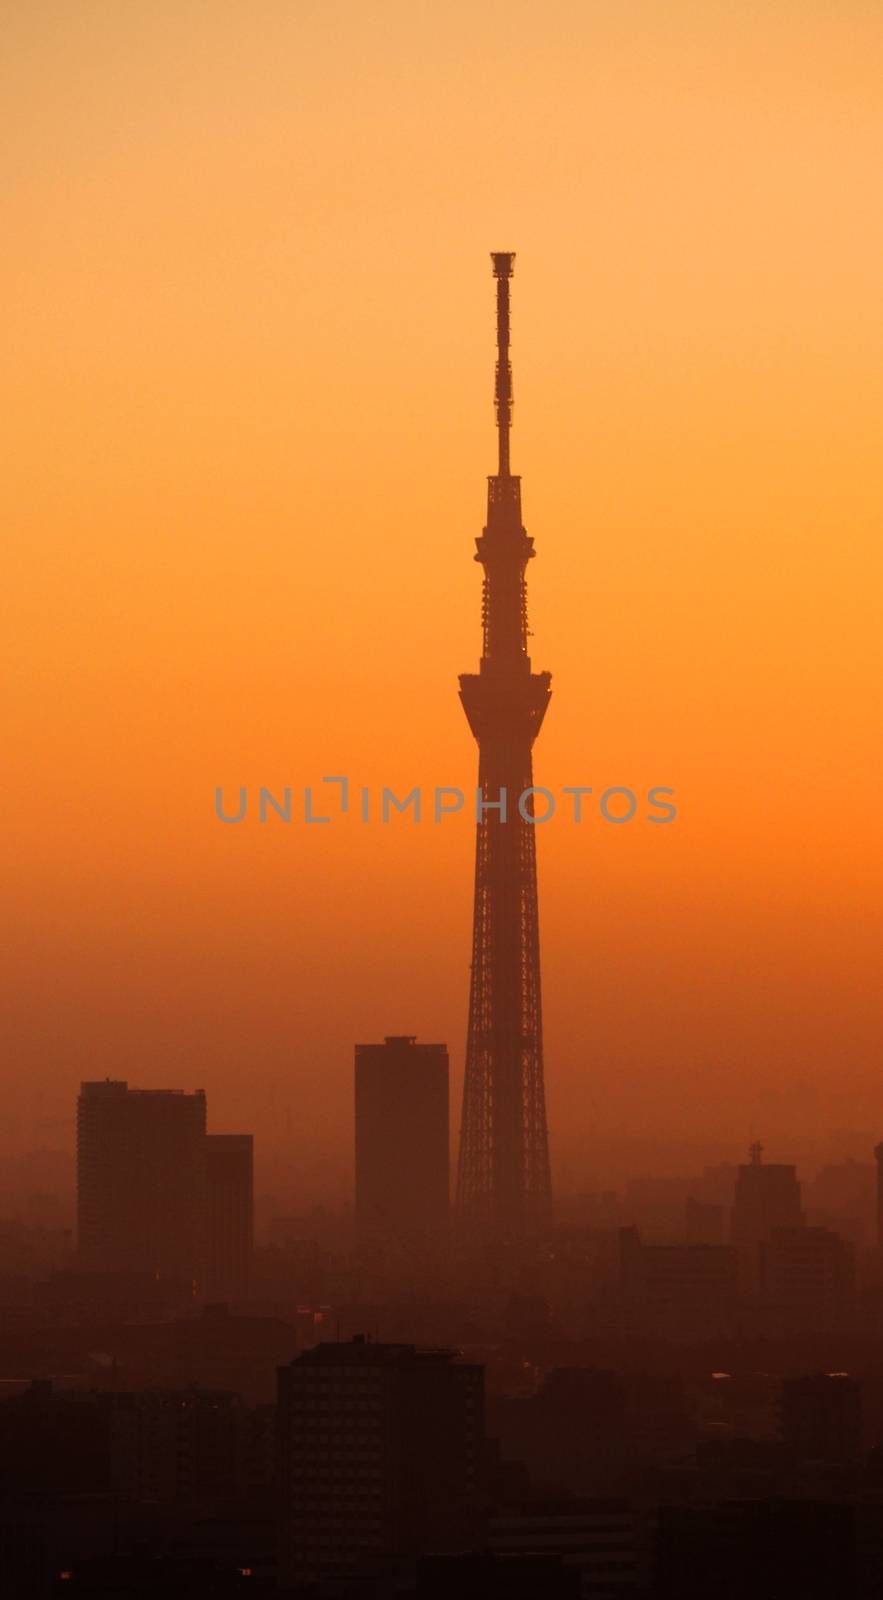 Silhouette of Tokyo sky tree building. by gnepphoto